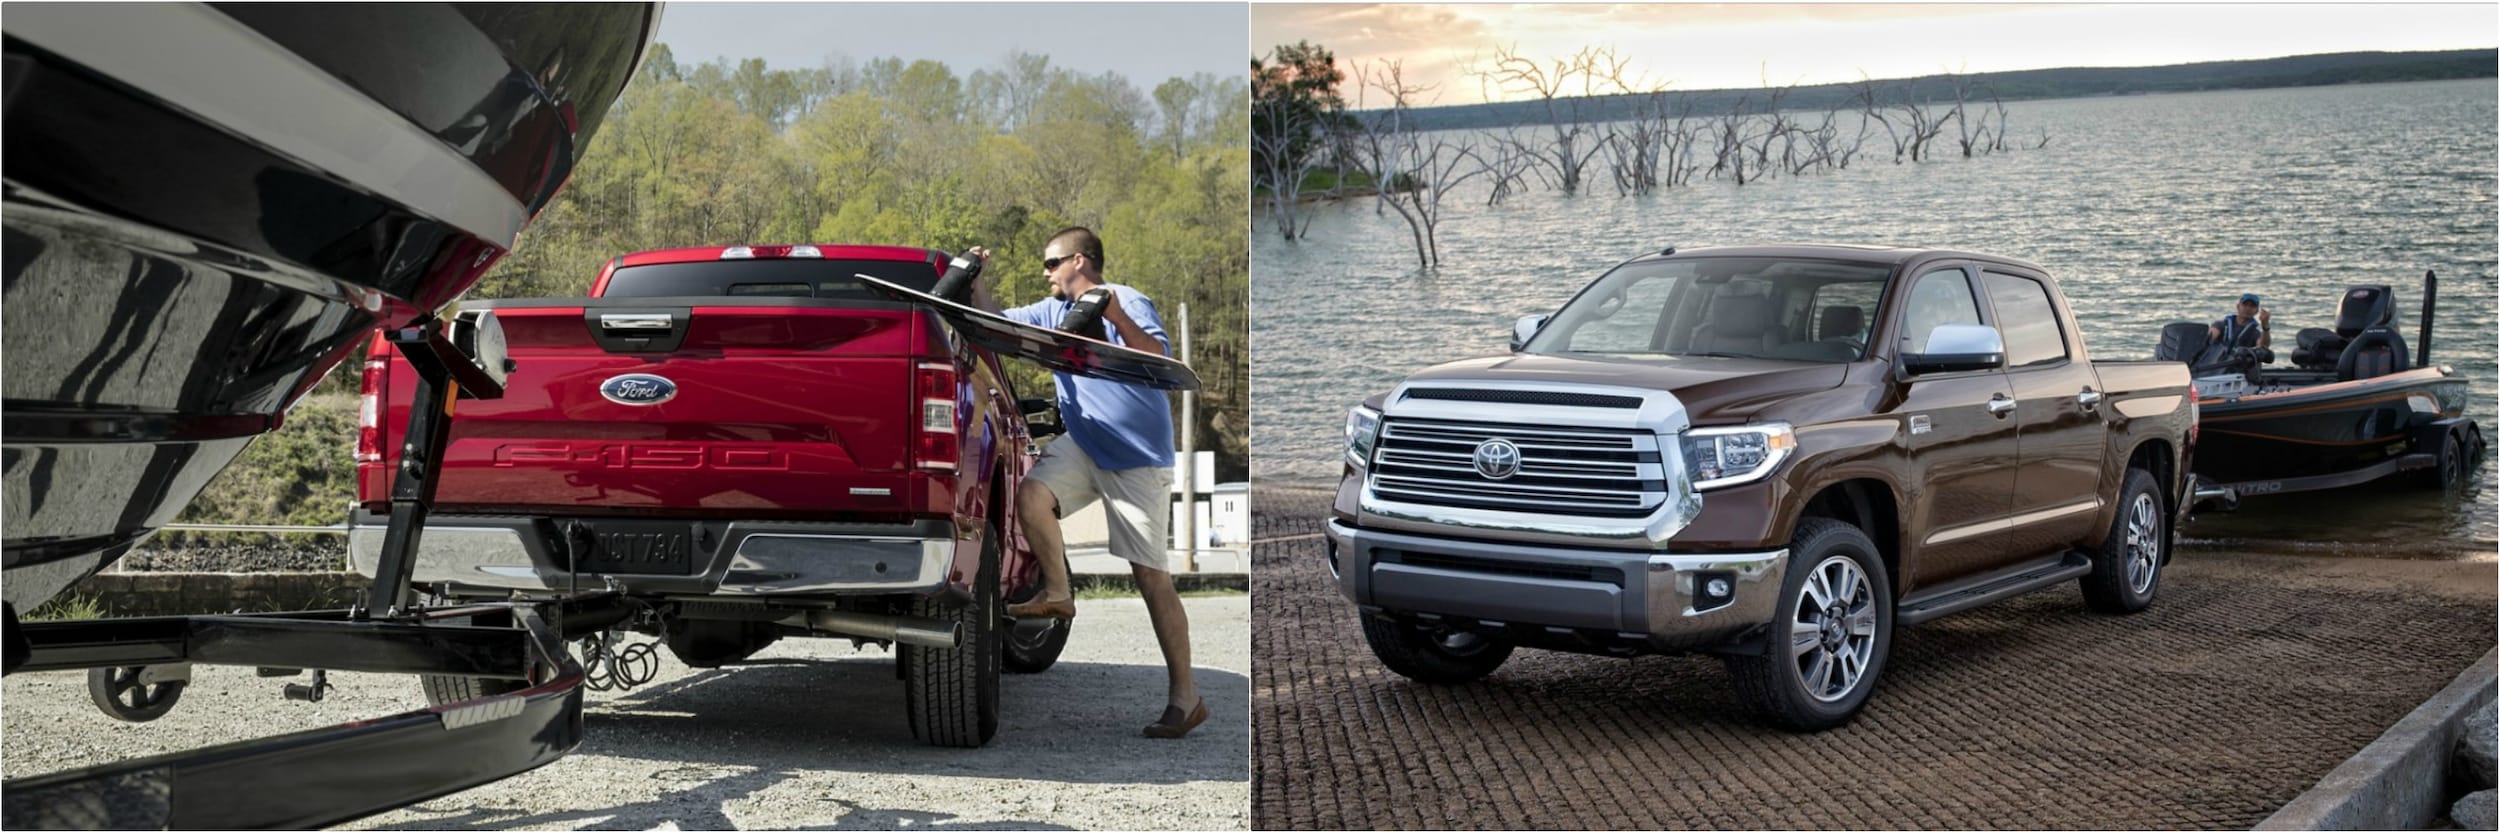 2020 Ford F-150 vs. Toyota Tundra | Phil Long Ford - Motor City